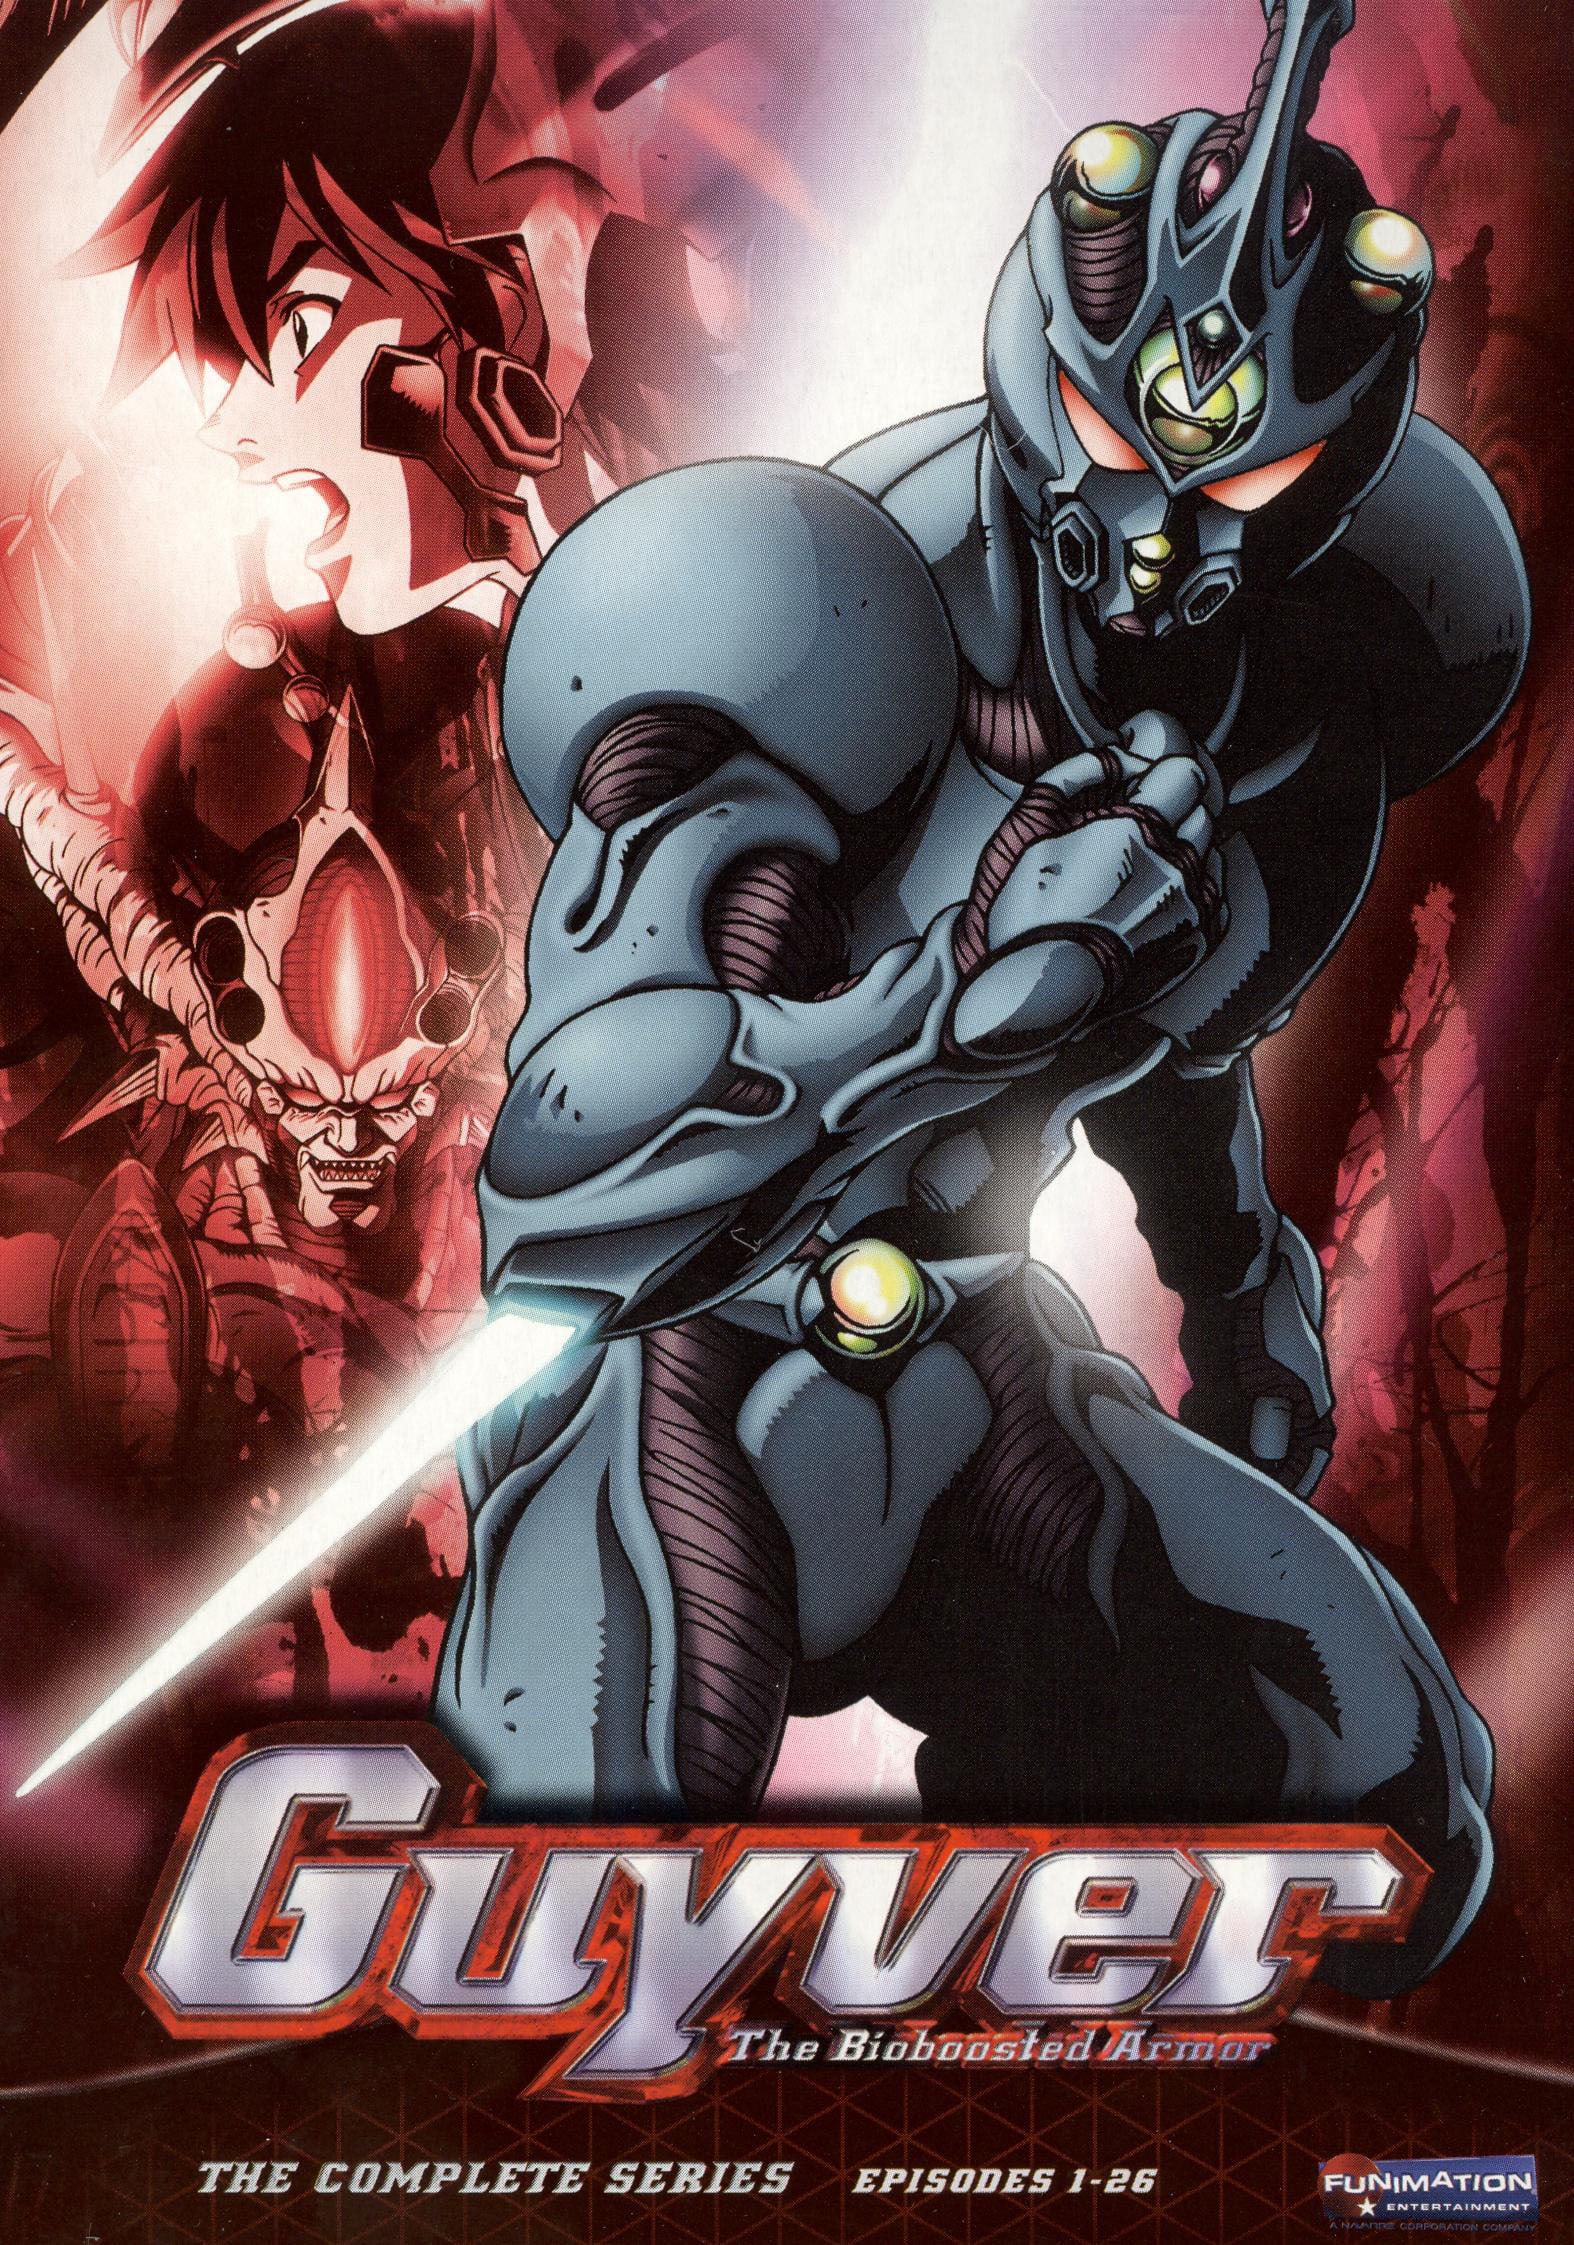 Guyver: The Bioboosted Armor (2005)